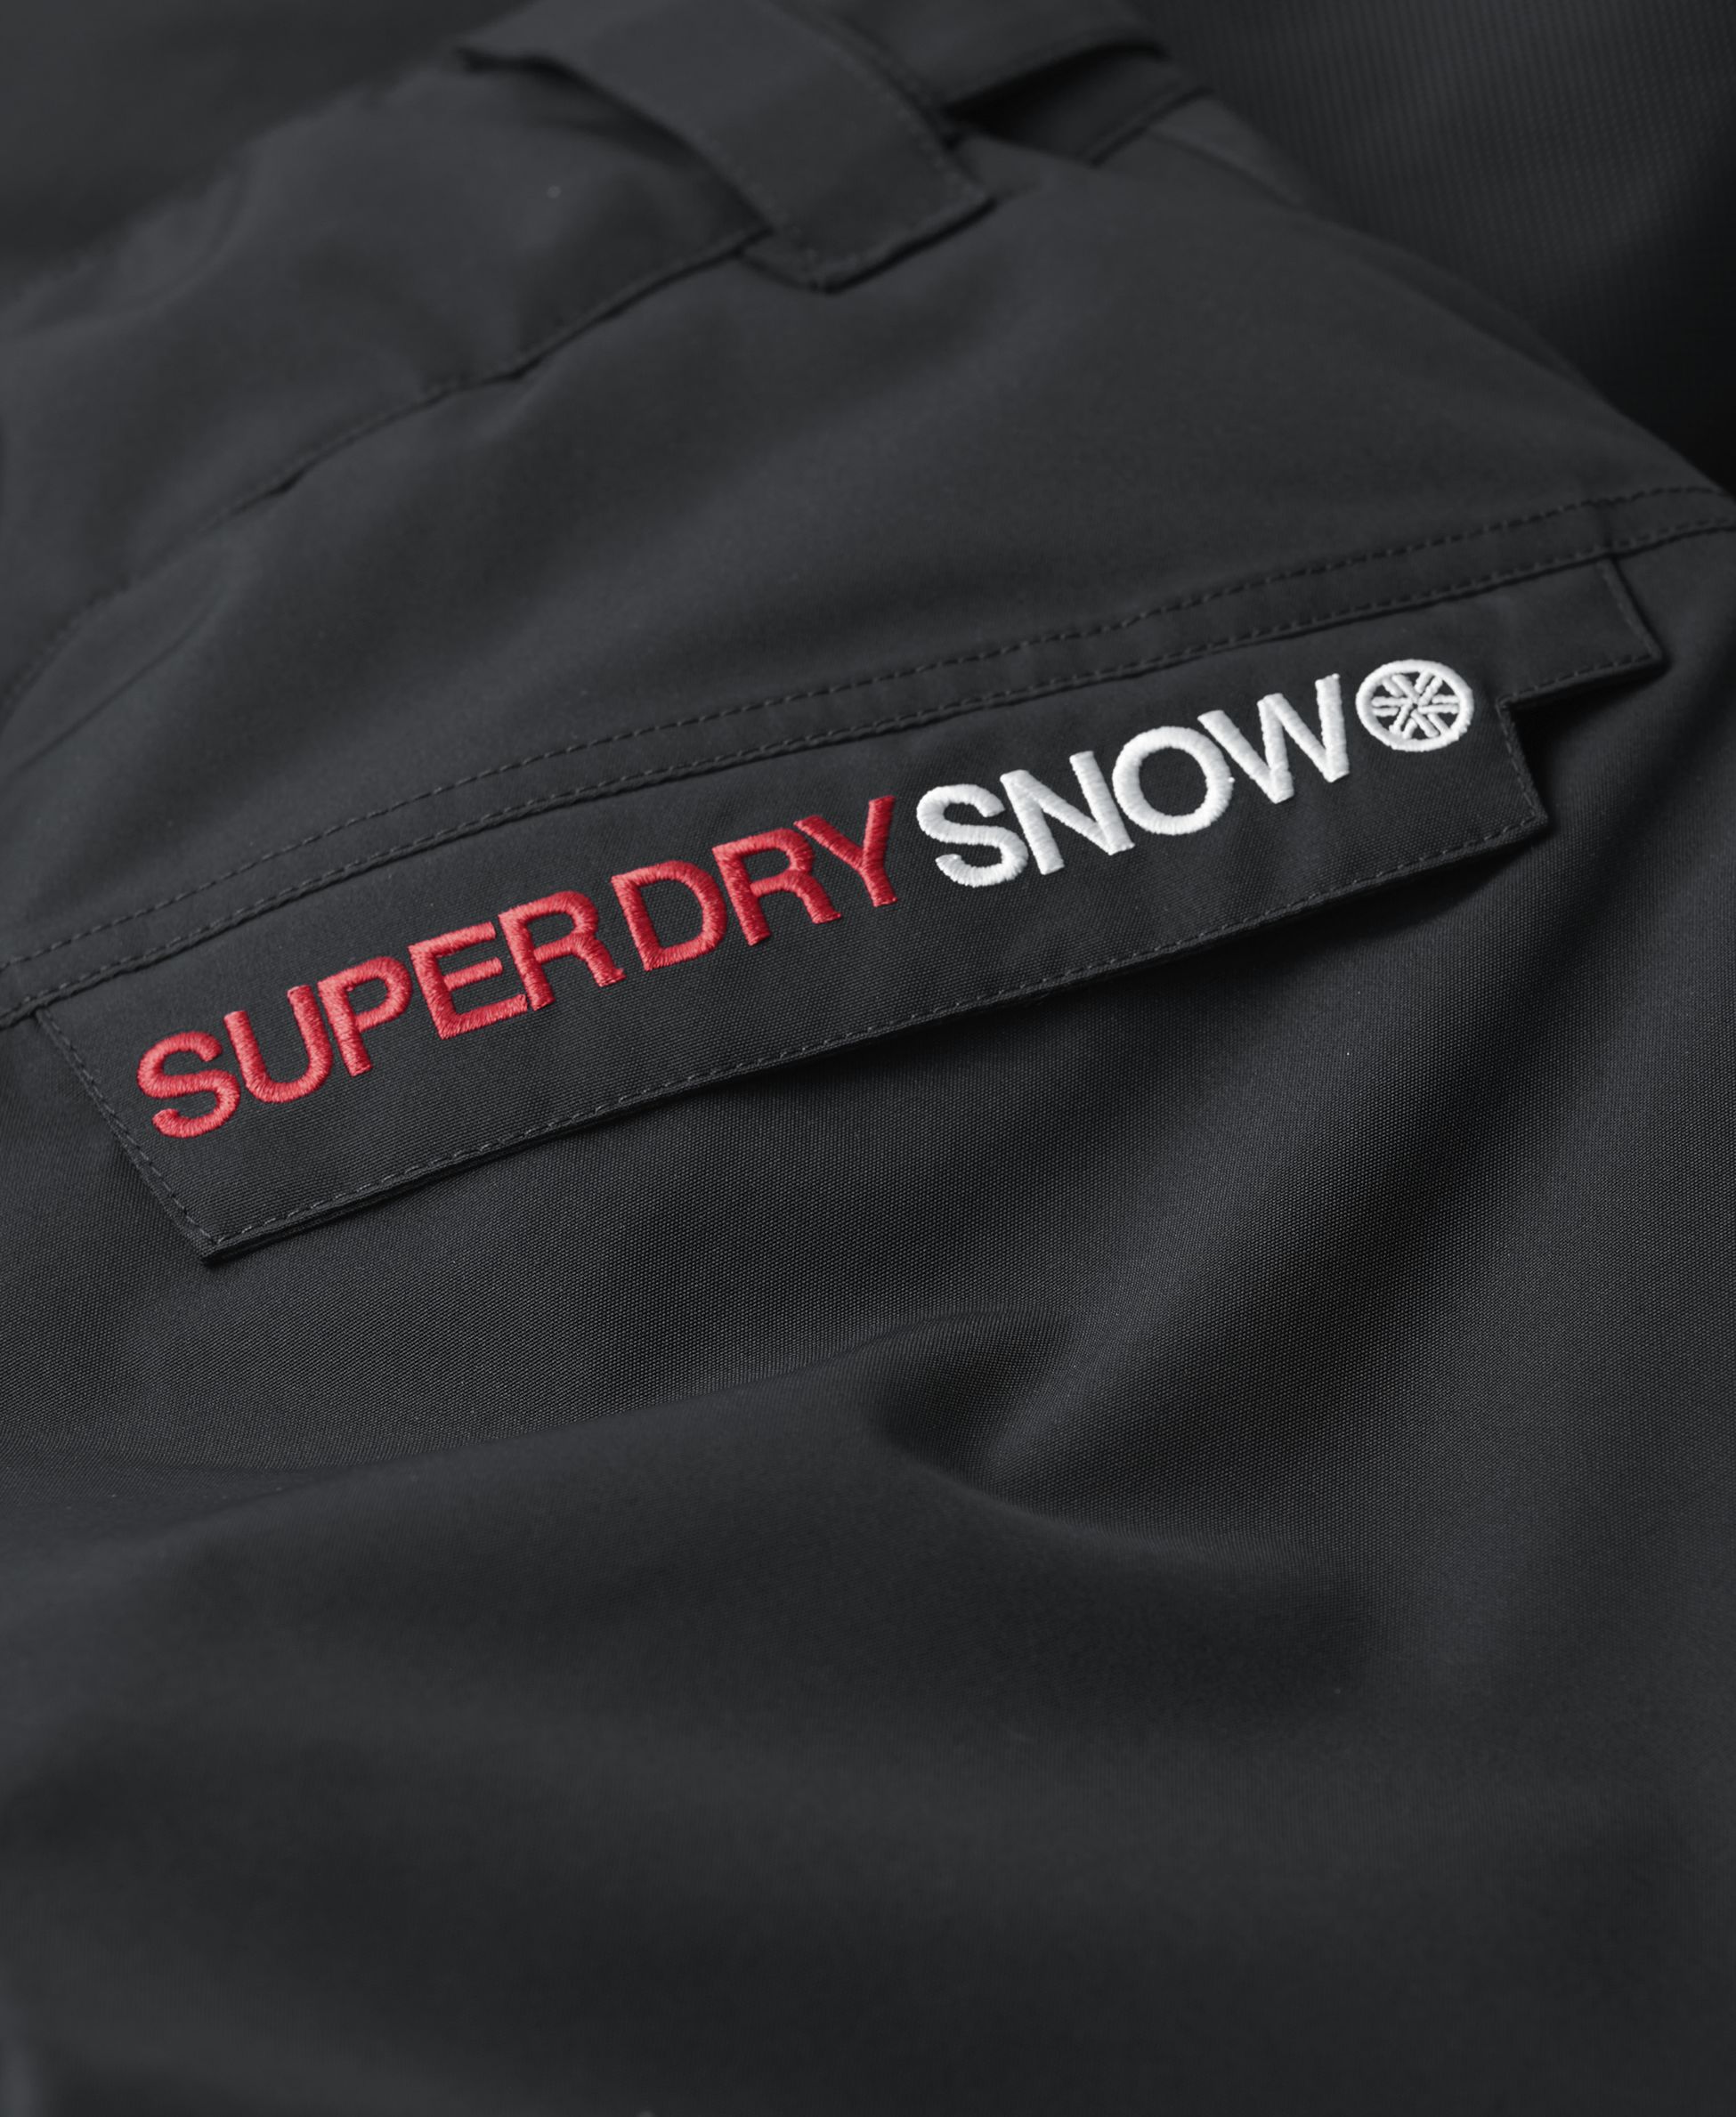 SUPERDRY, FREESTYLE CORE SKI TROUSERS